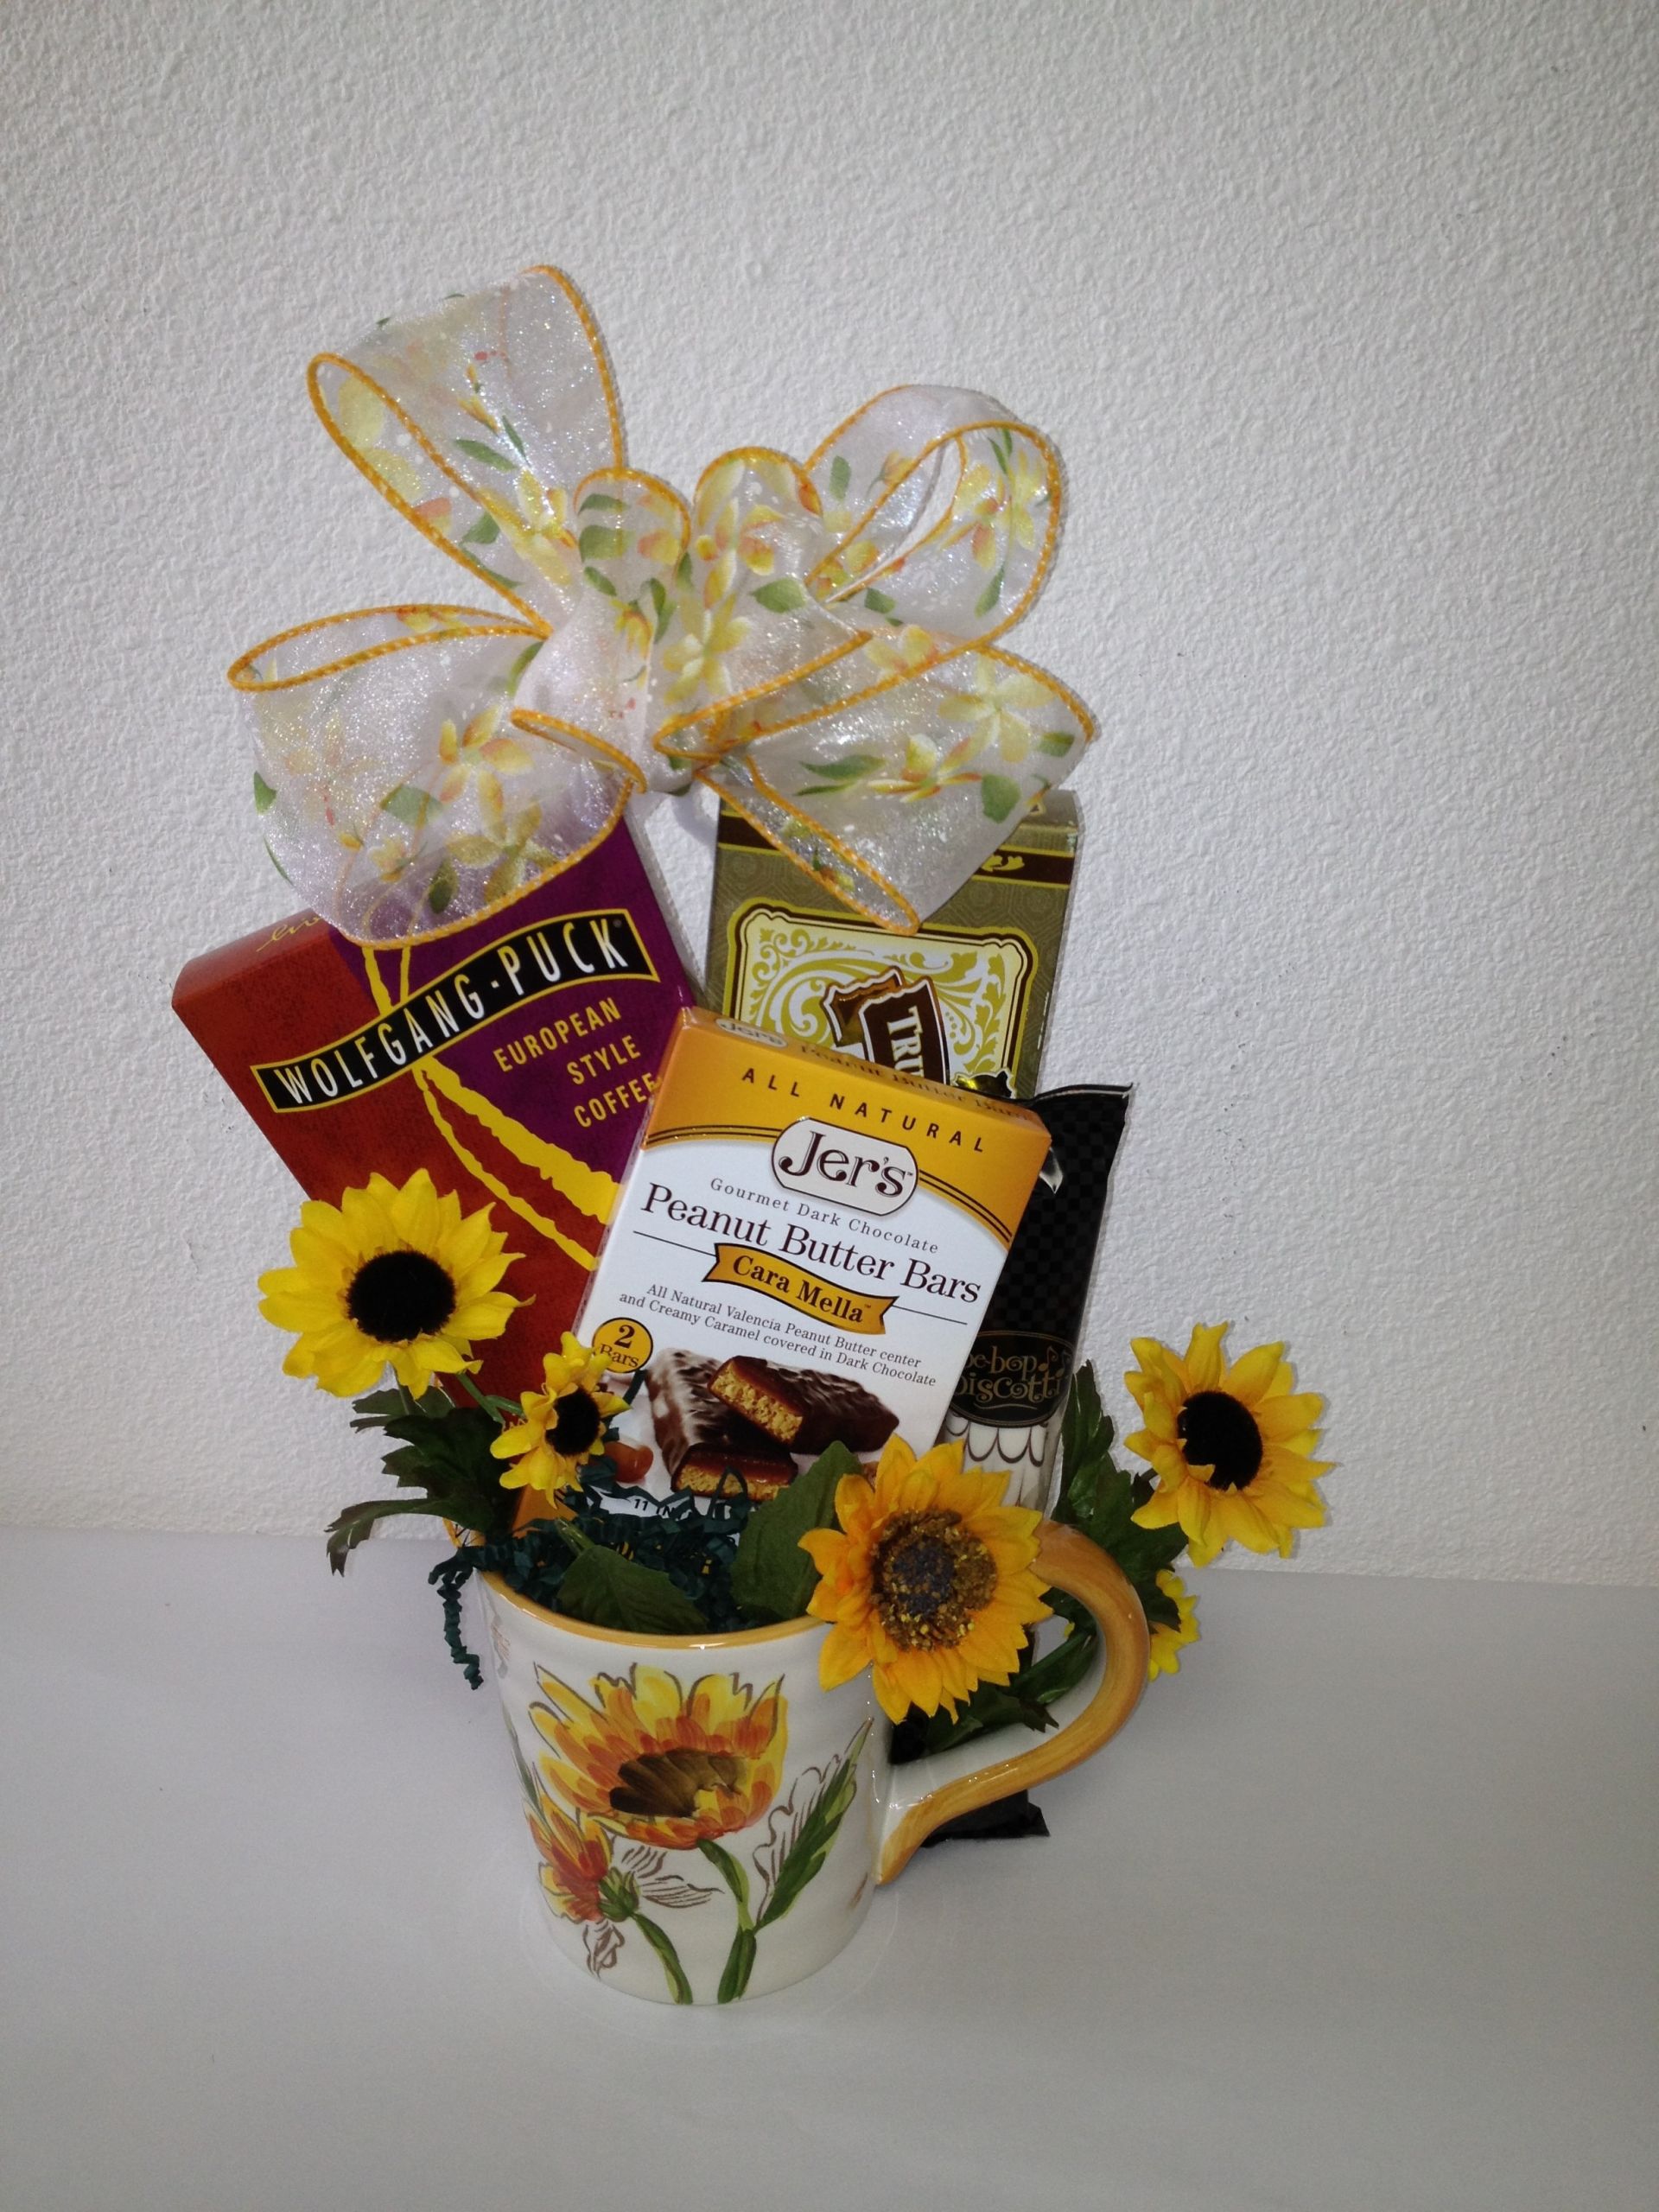 Mothers Day Cheap Gift Ideas
 Inexpensive Mother s Day Gift Baskets